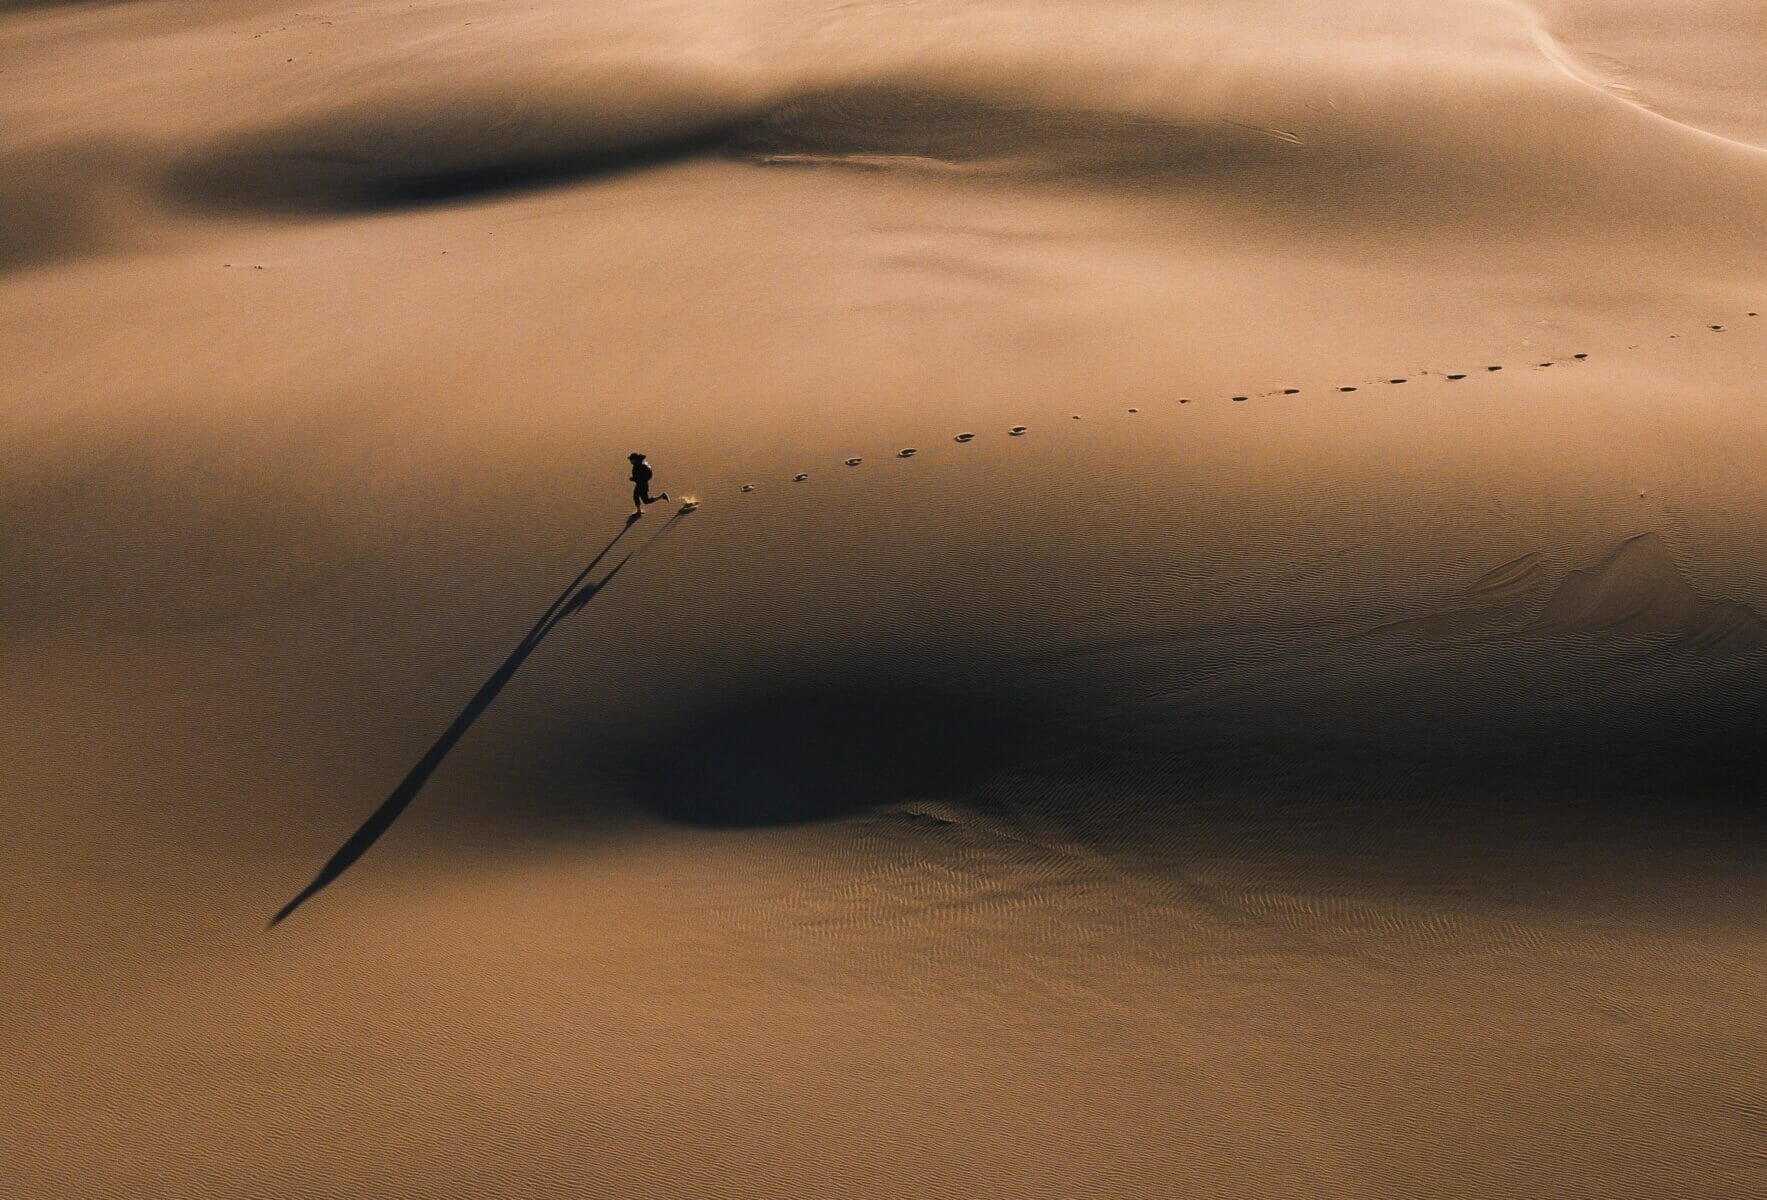 A long shadow appears as a man runs across the sands of time. A large sand dune in Bobs Farm NSW 2316, Australia.